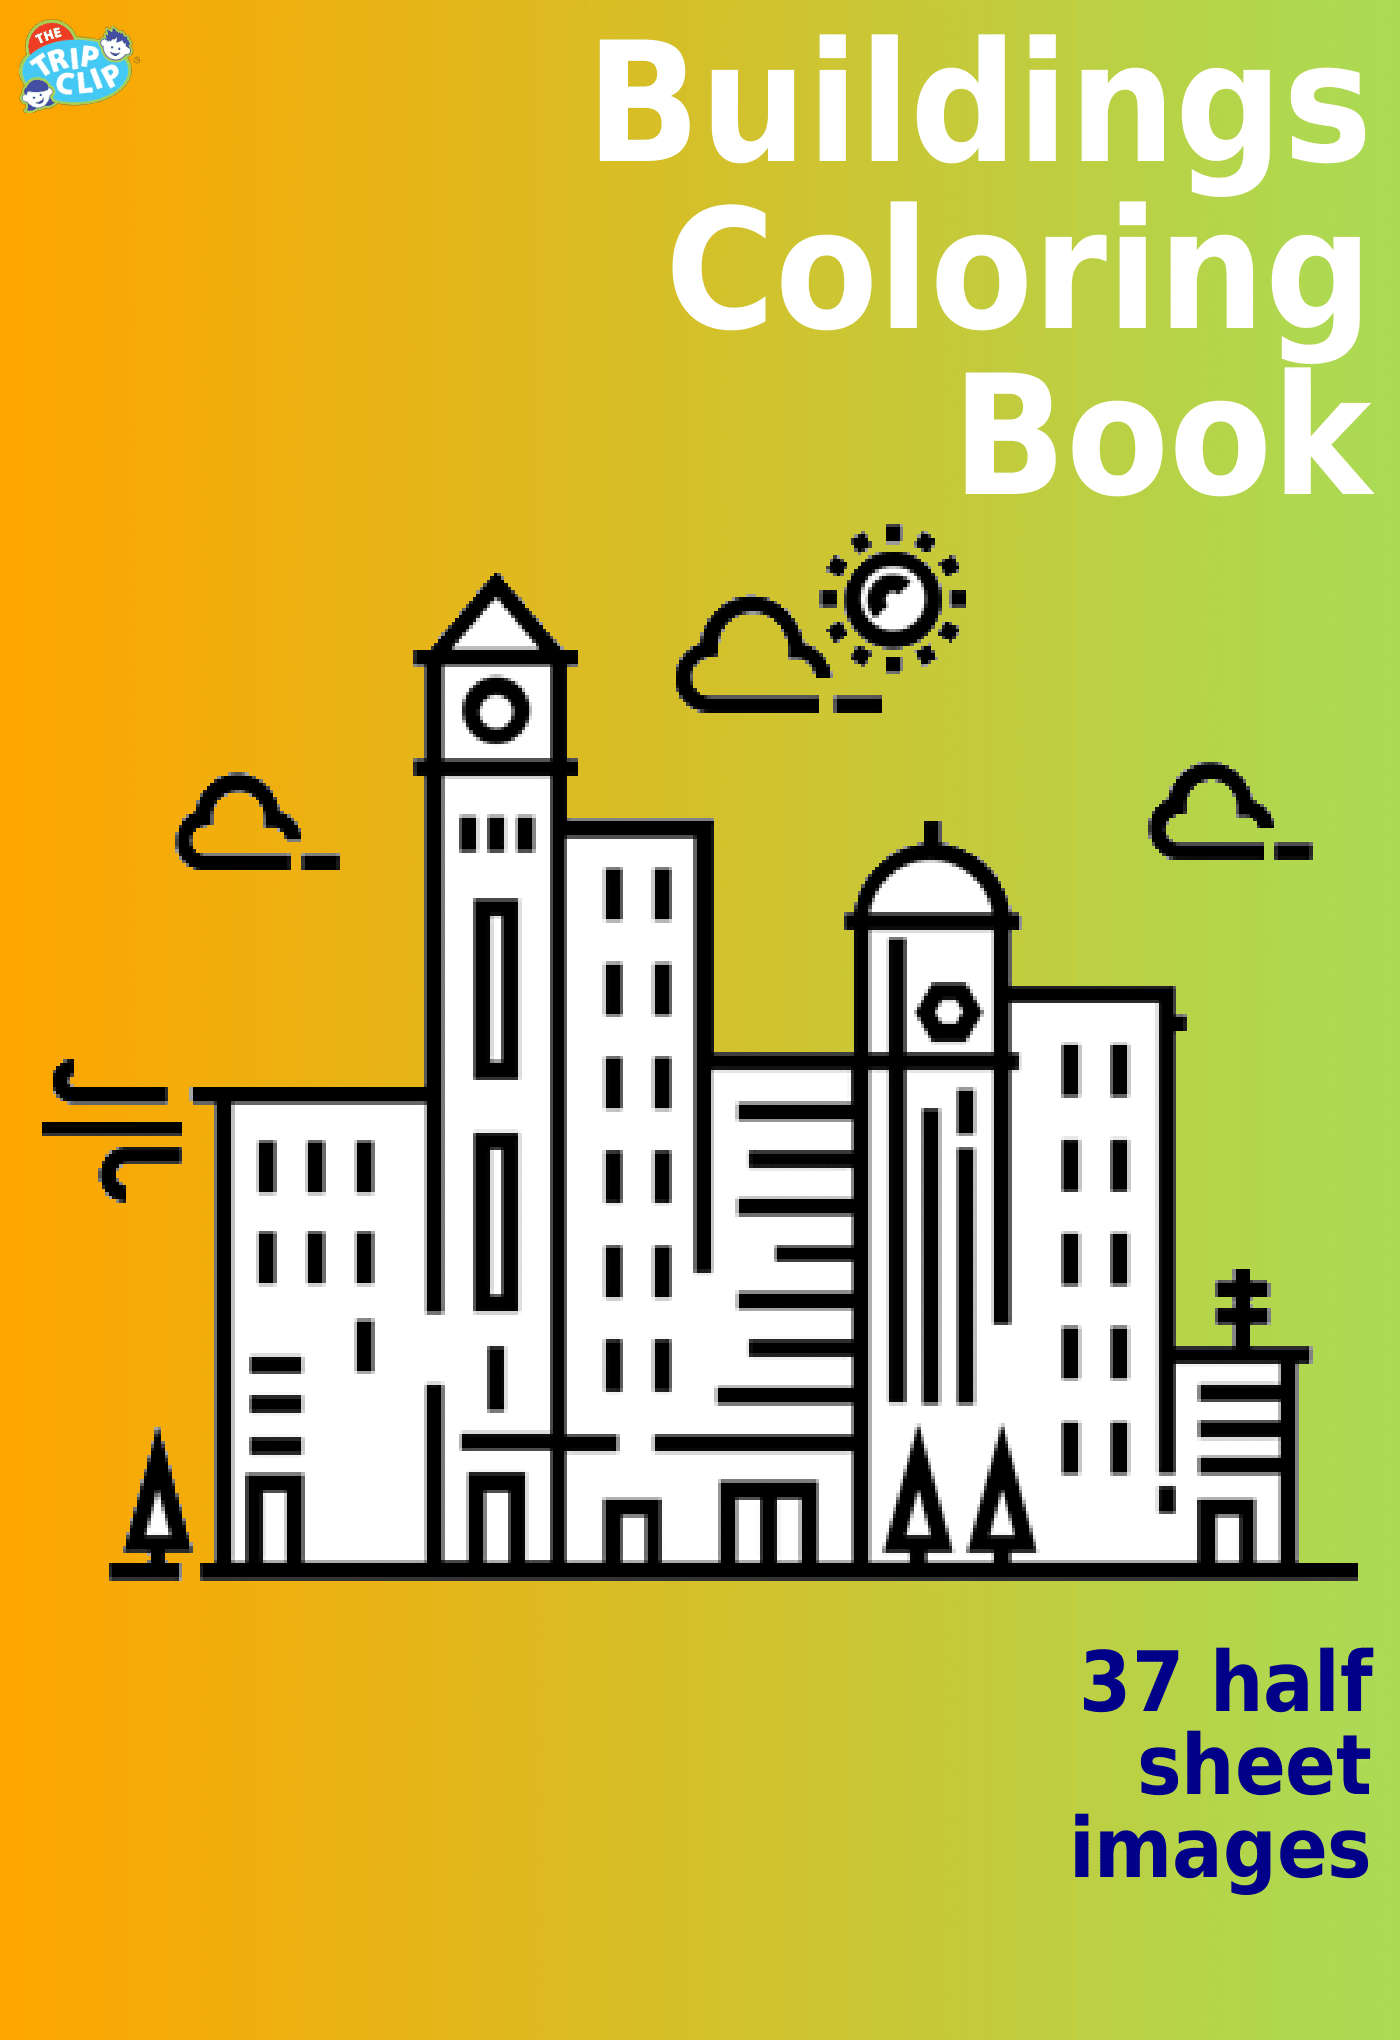 53 coloring pages, showing a cityscape